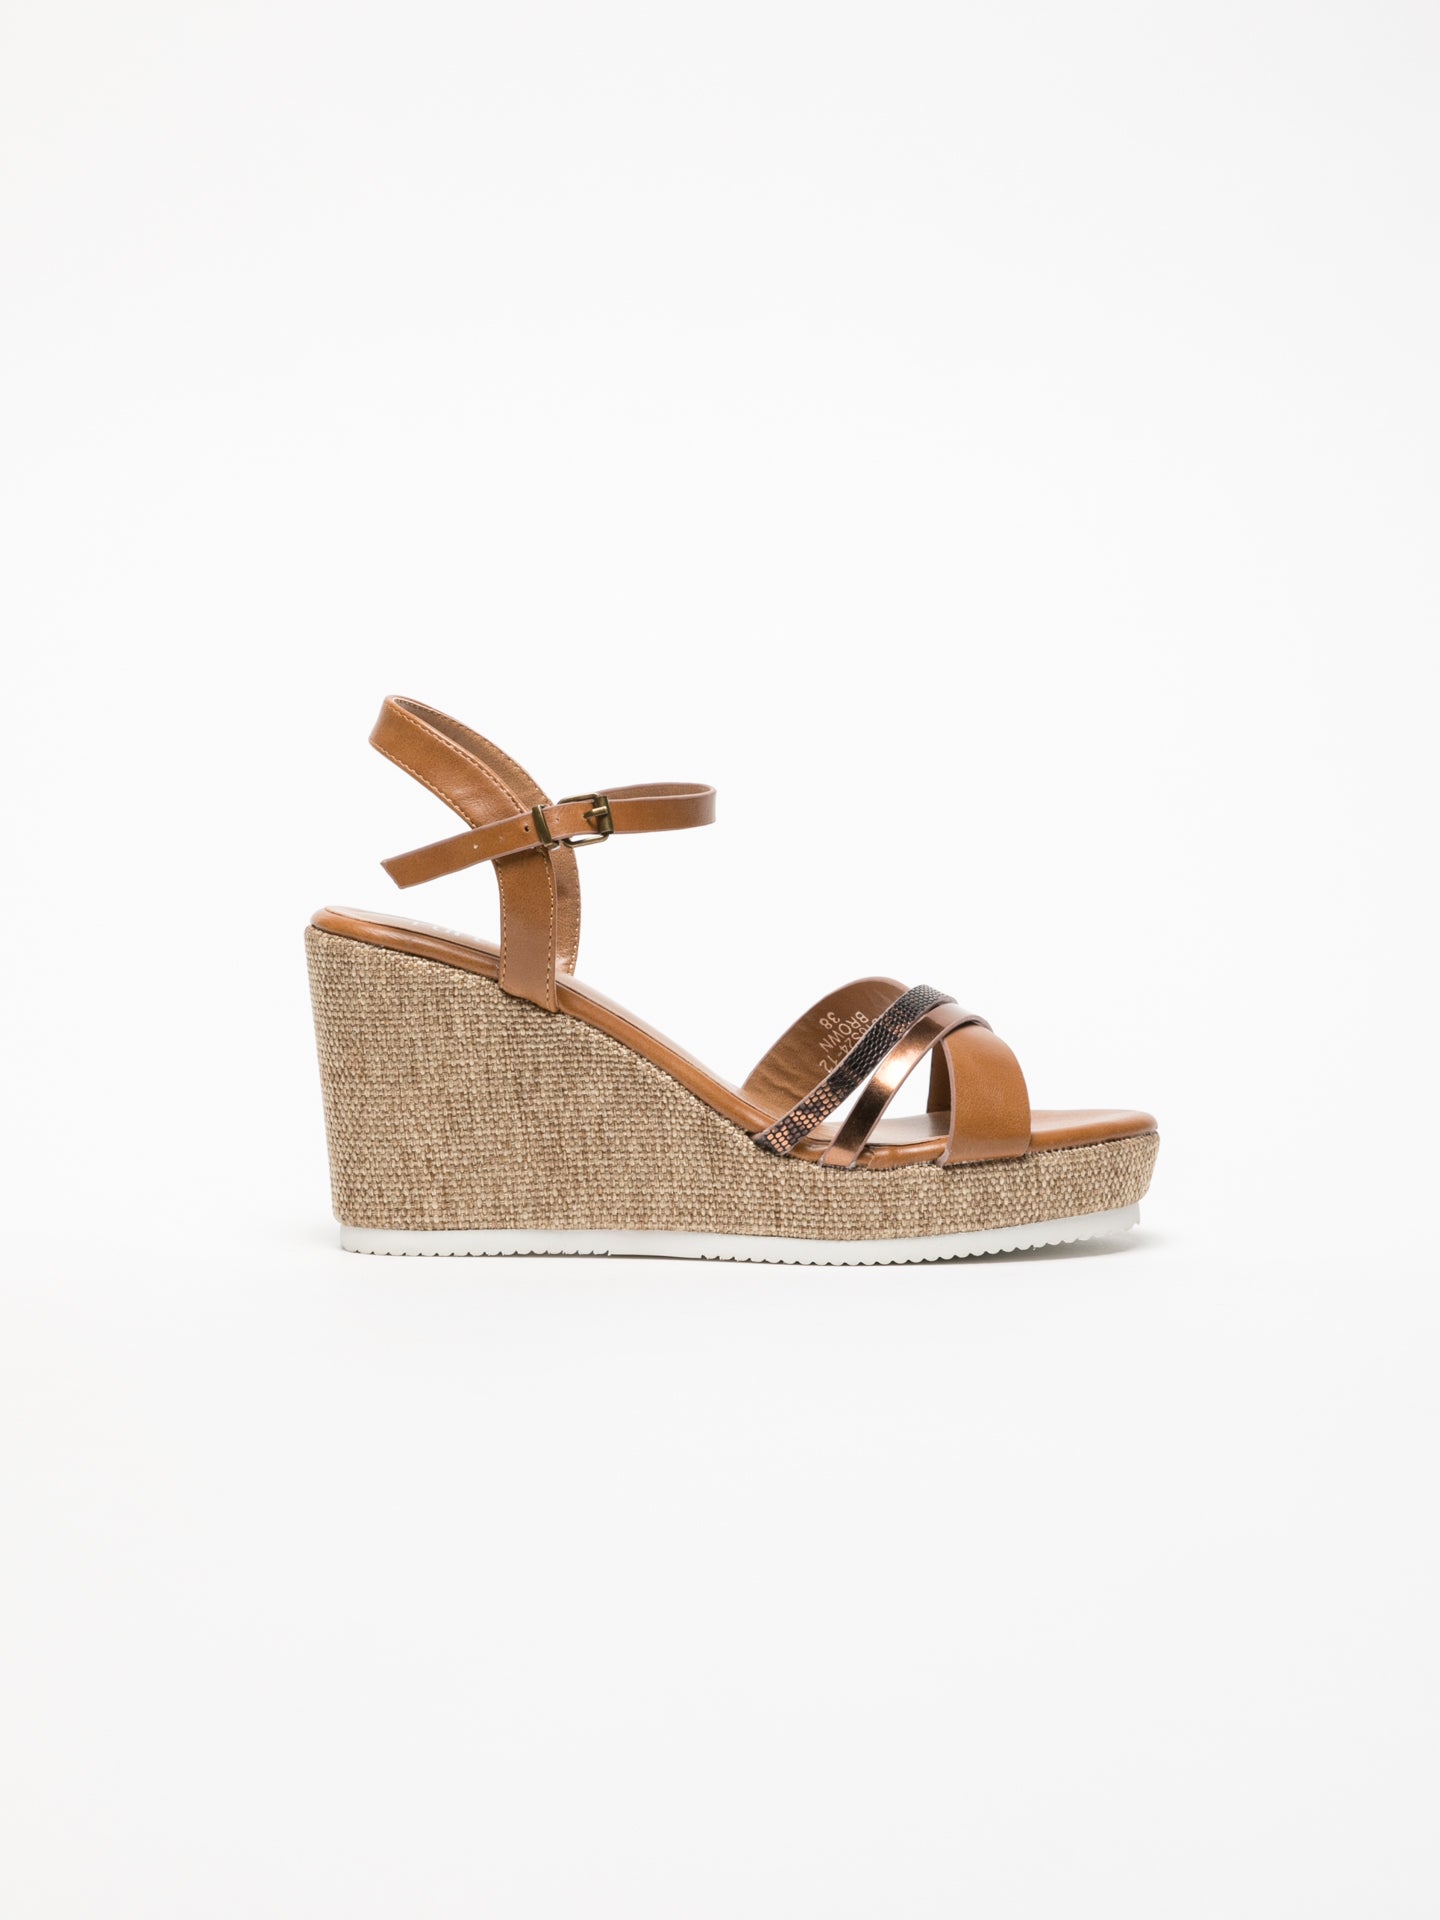 Foreva Brown Wedge Sandals